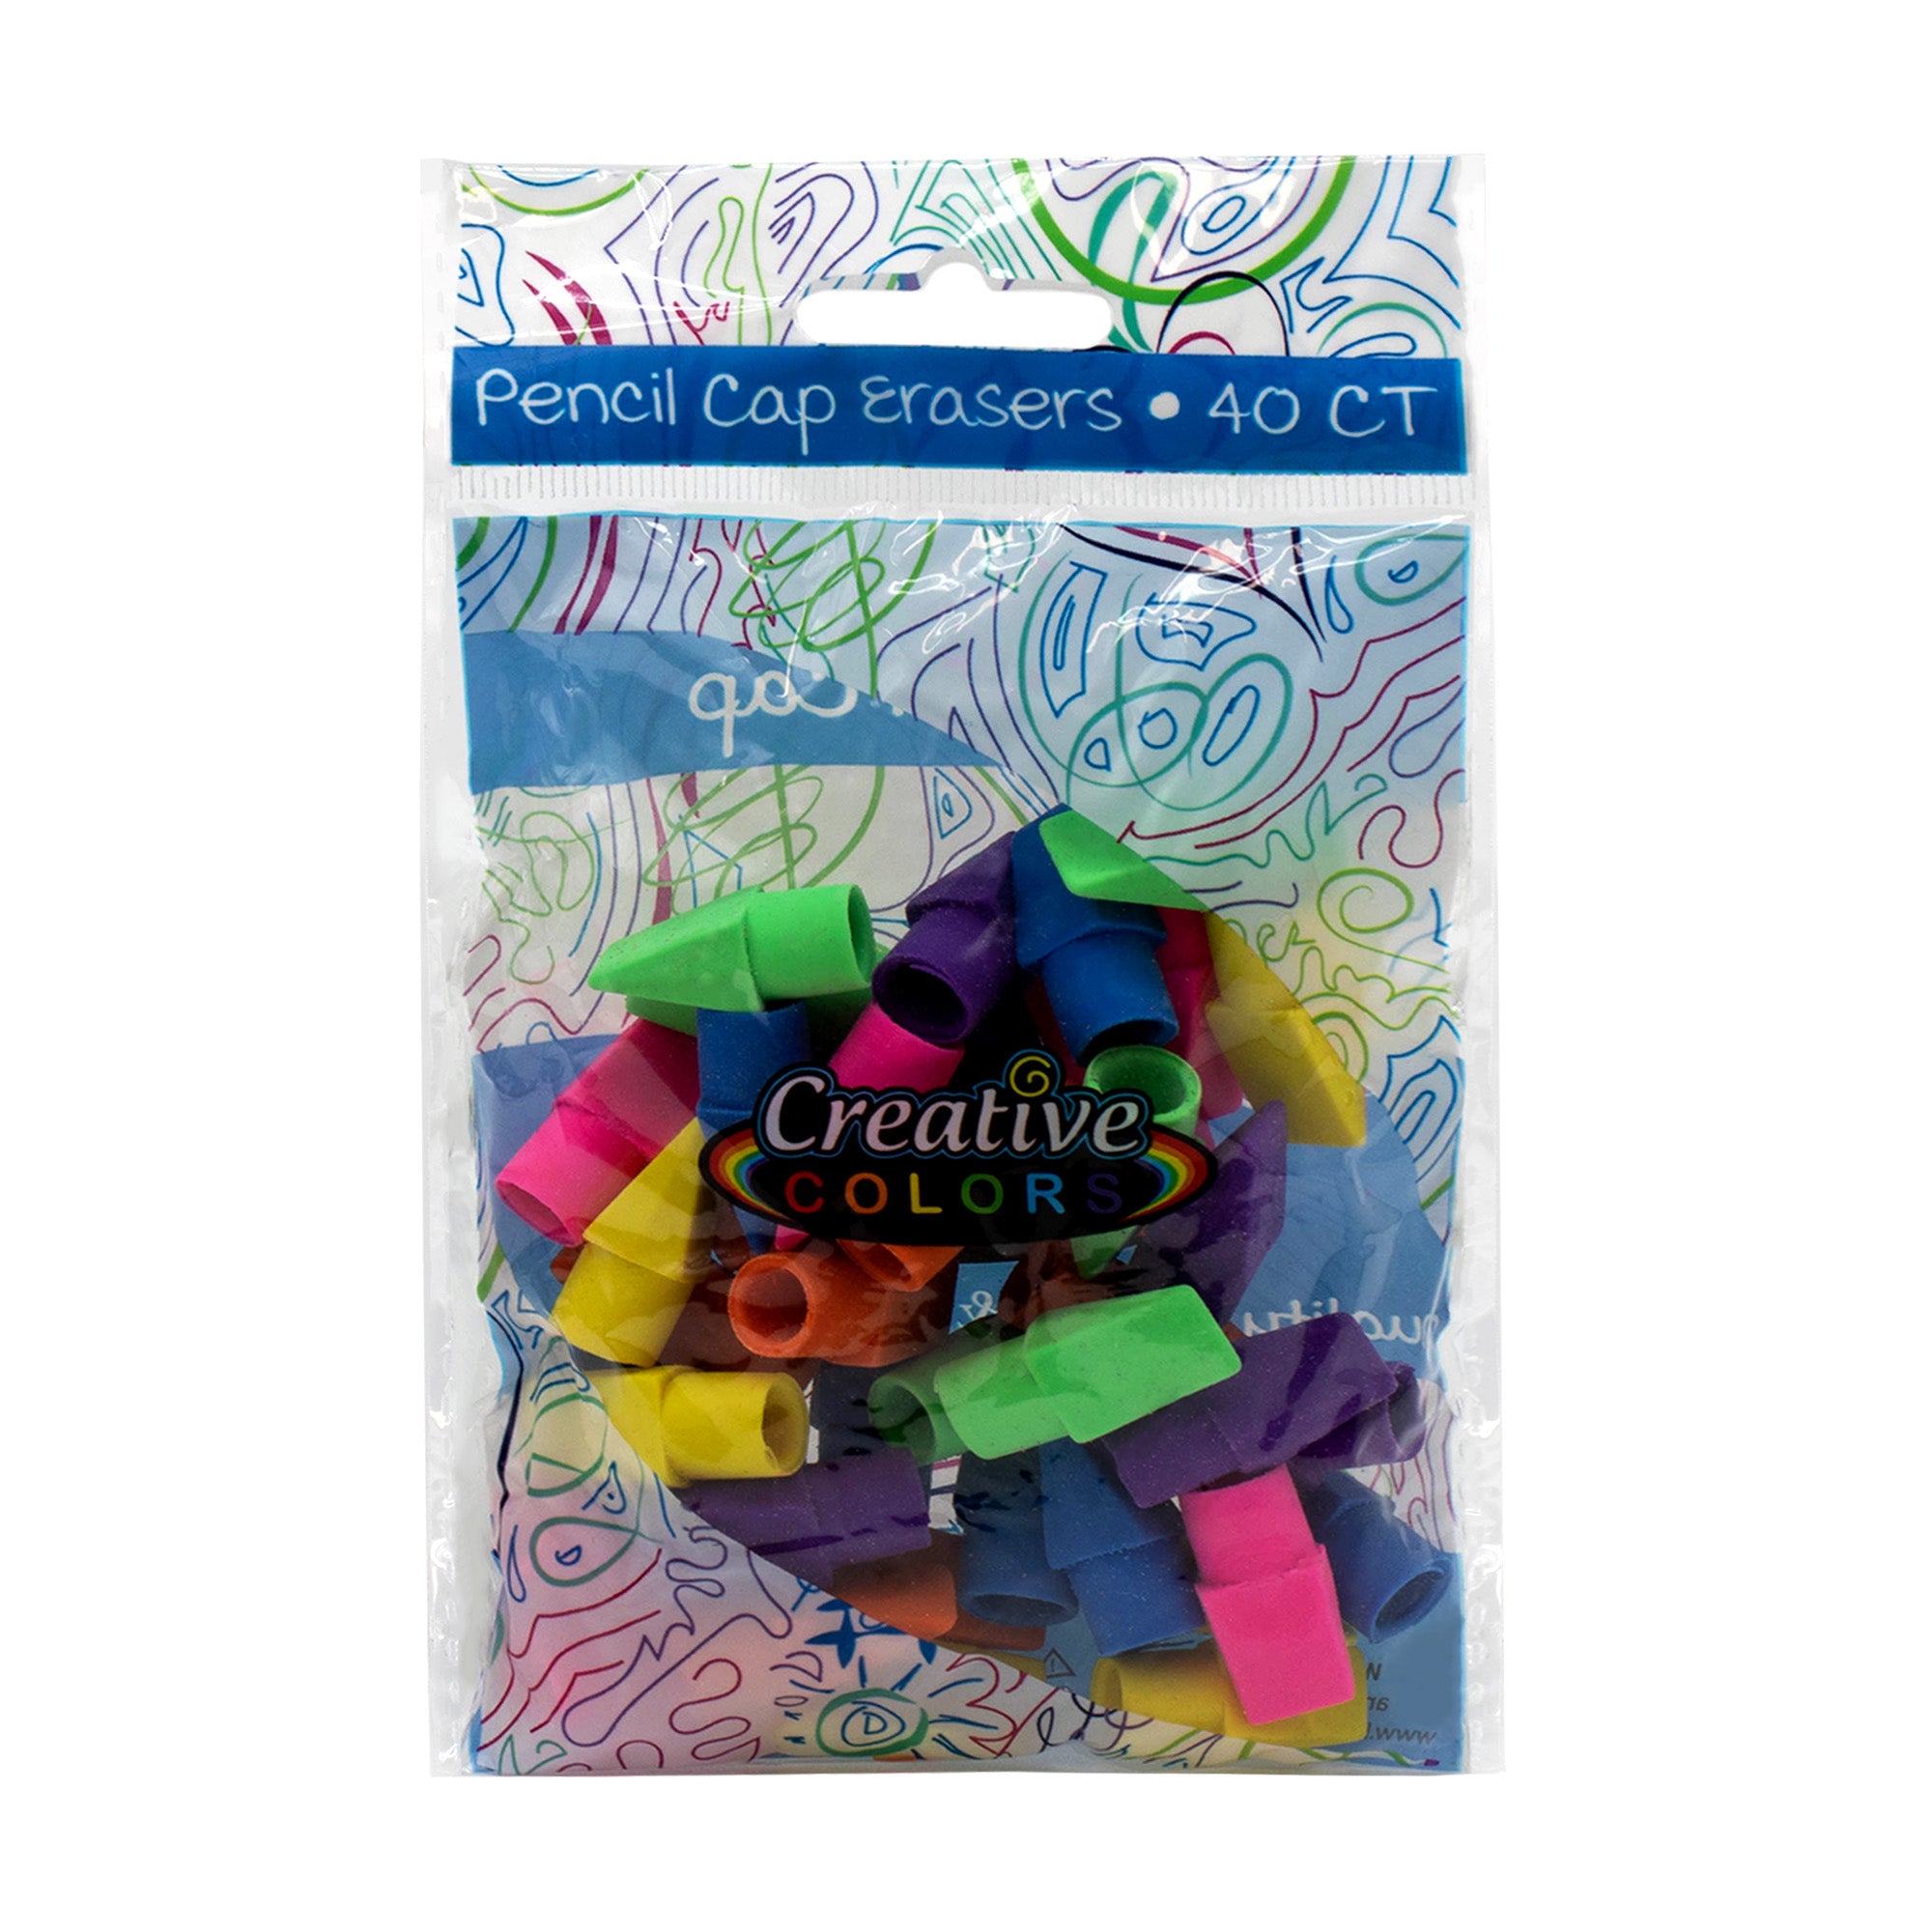 40 Pack of Colored Pencil Cap Erasers - Bulk School Supplies Wholesale Case of 96 Packs of Colored Pencil Cap Erasers